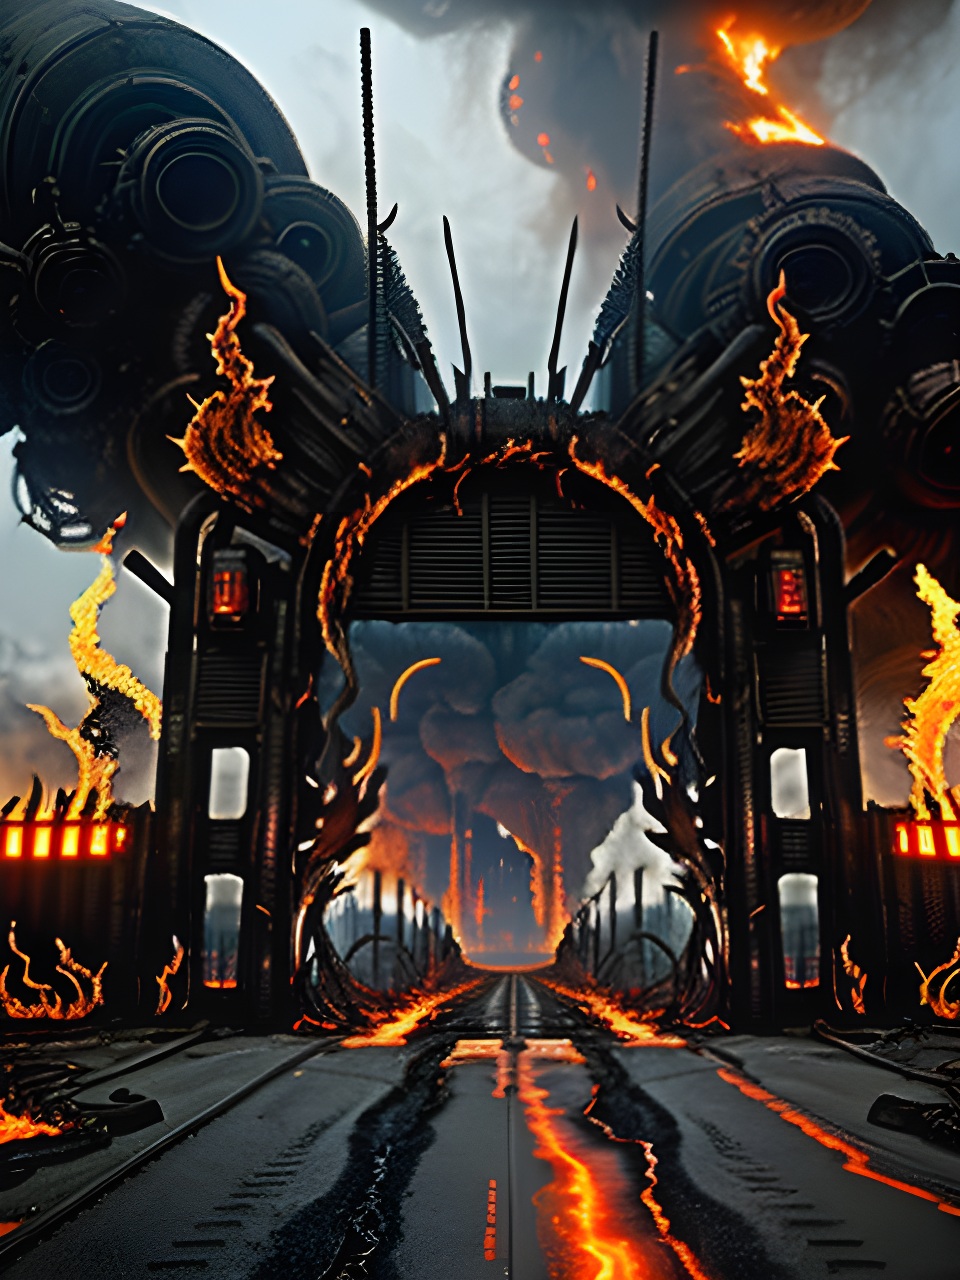 The Scorched Gateway